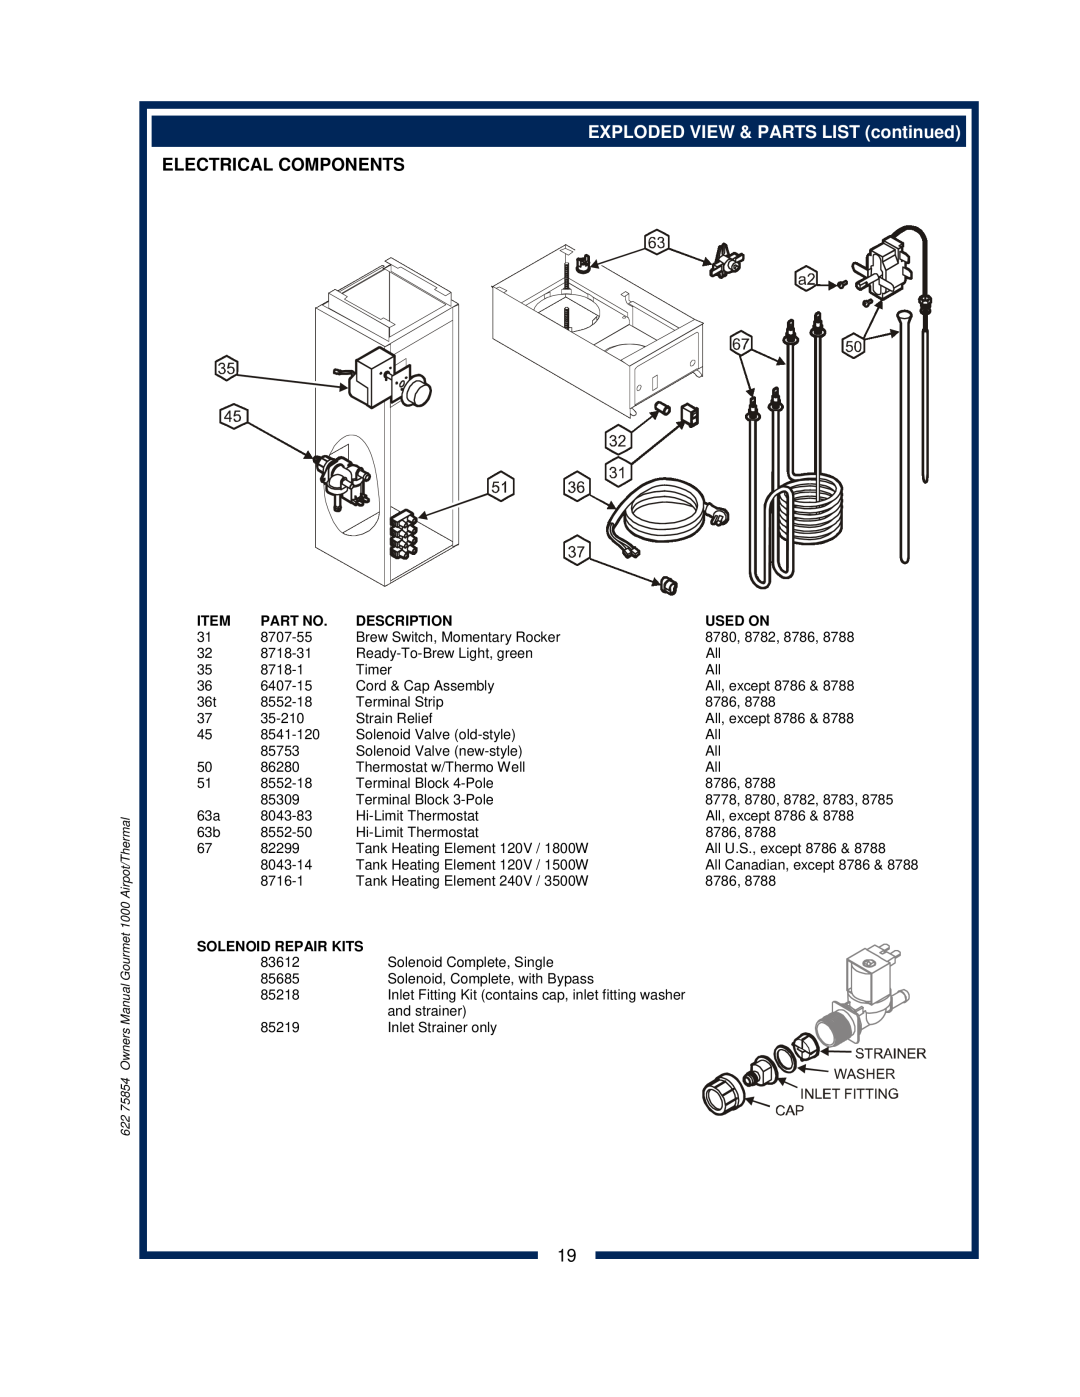 Bloomfield 8785 EXPLODED VIEW & PARTS LIST continued, Electrical Components, Description, Used On, Solenoid Repair Kits 